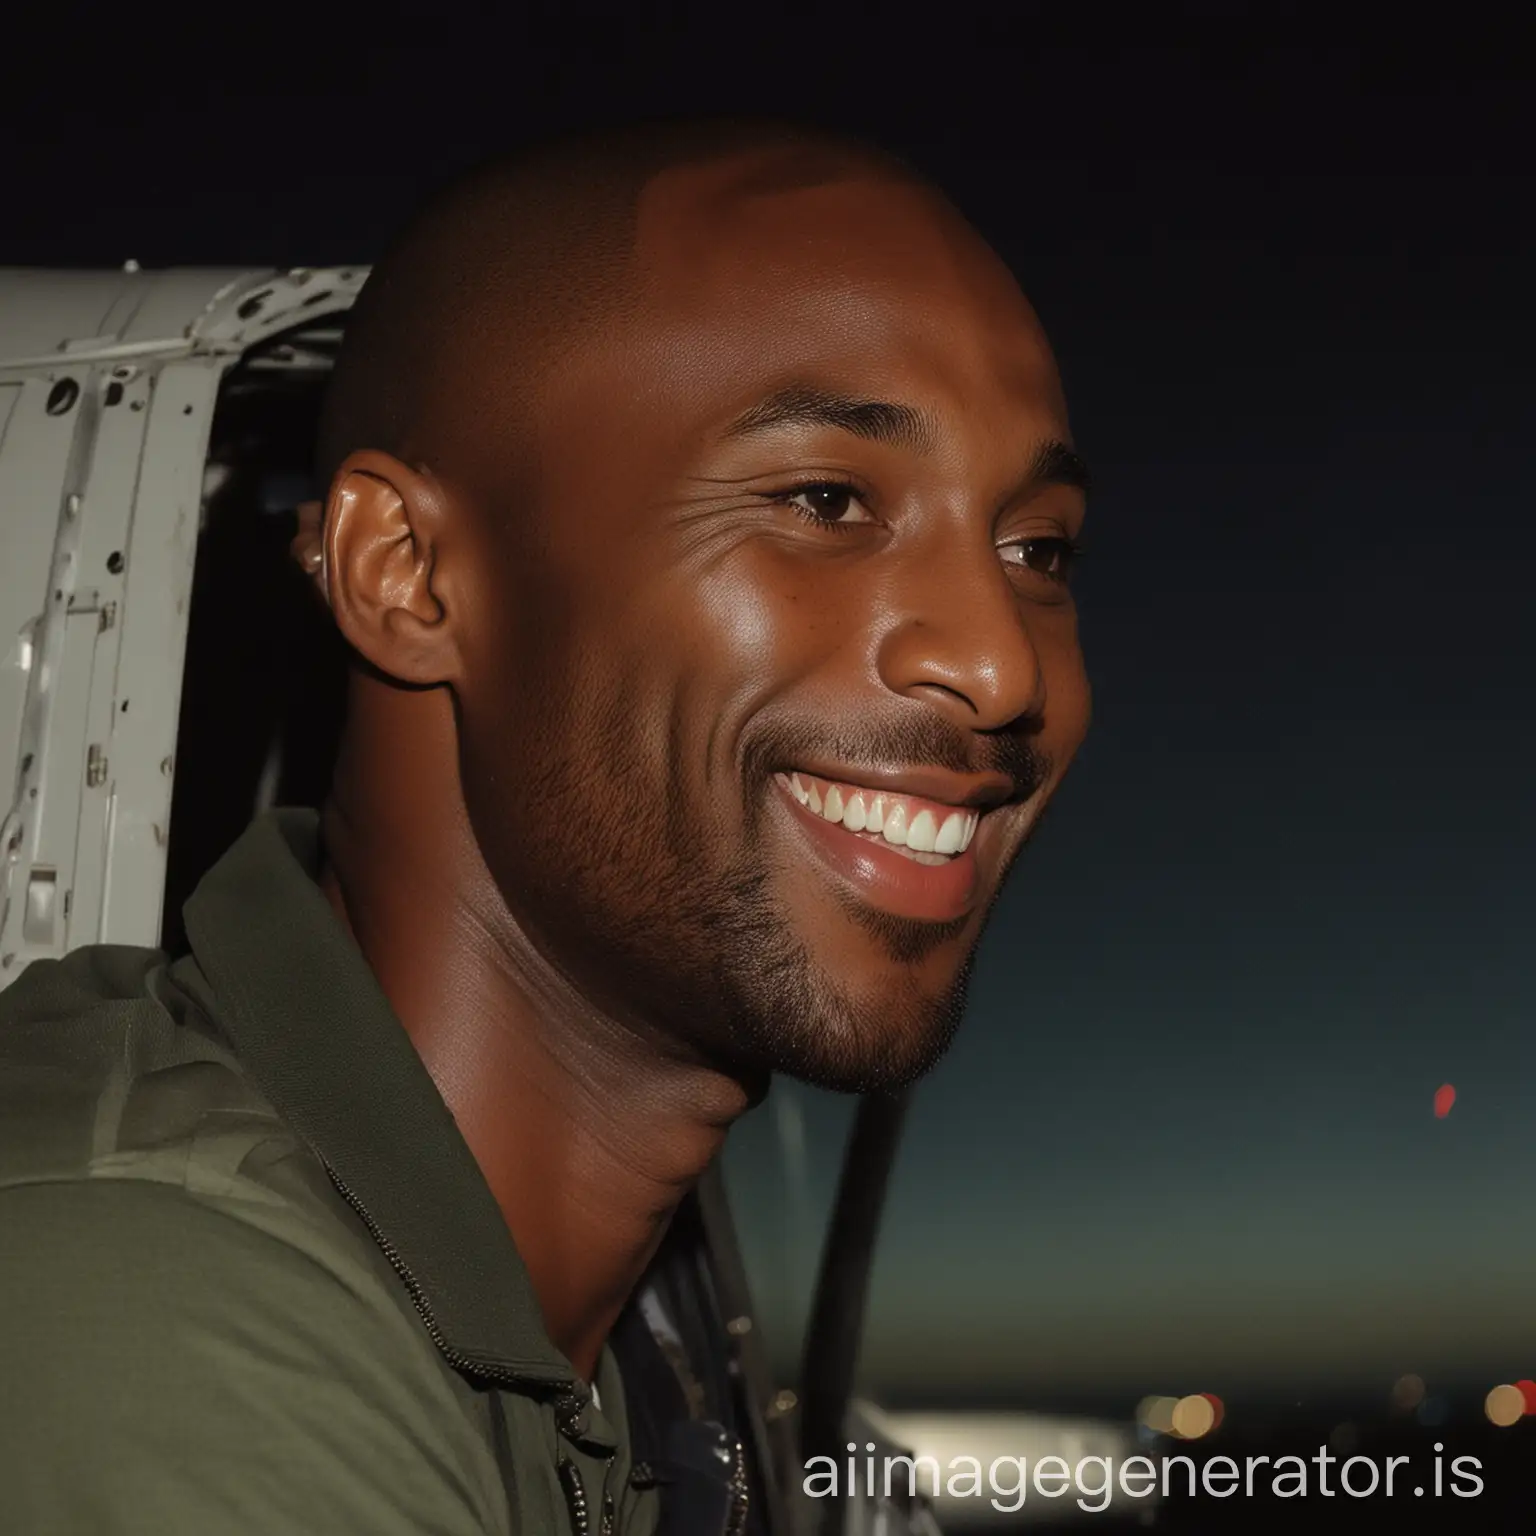 Kobe is leaning on the outside of a helicopter, smiling, it's night time, and the evening wind is blowing on his face